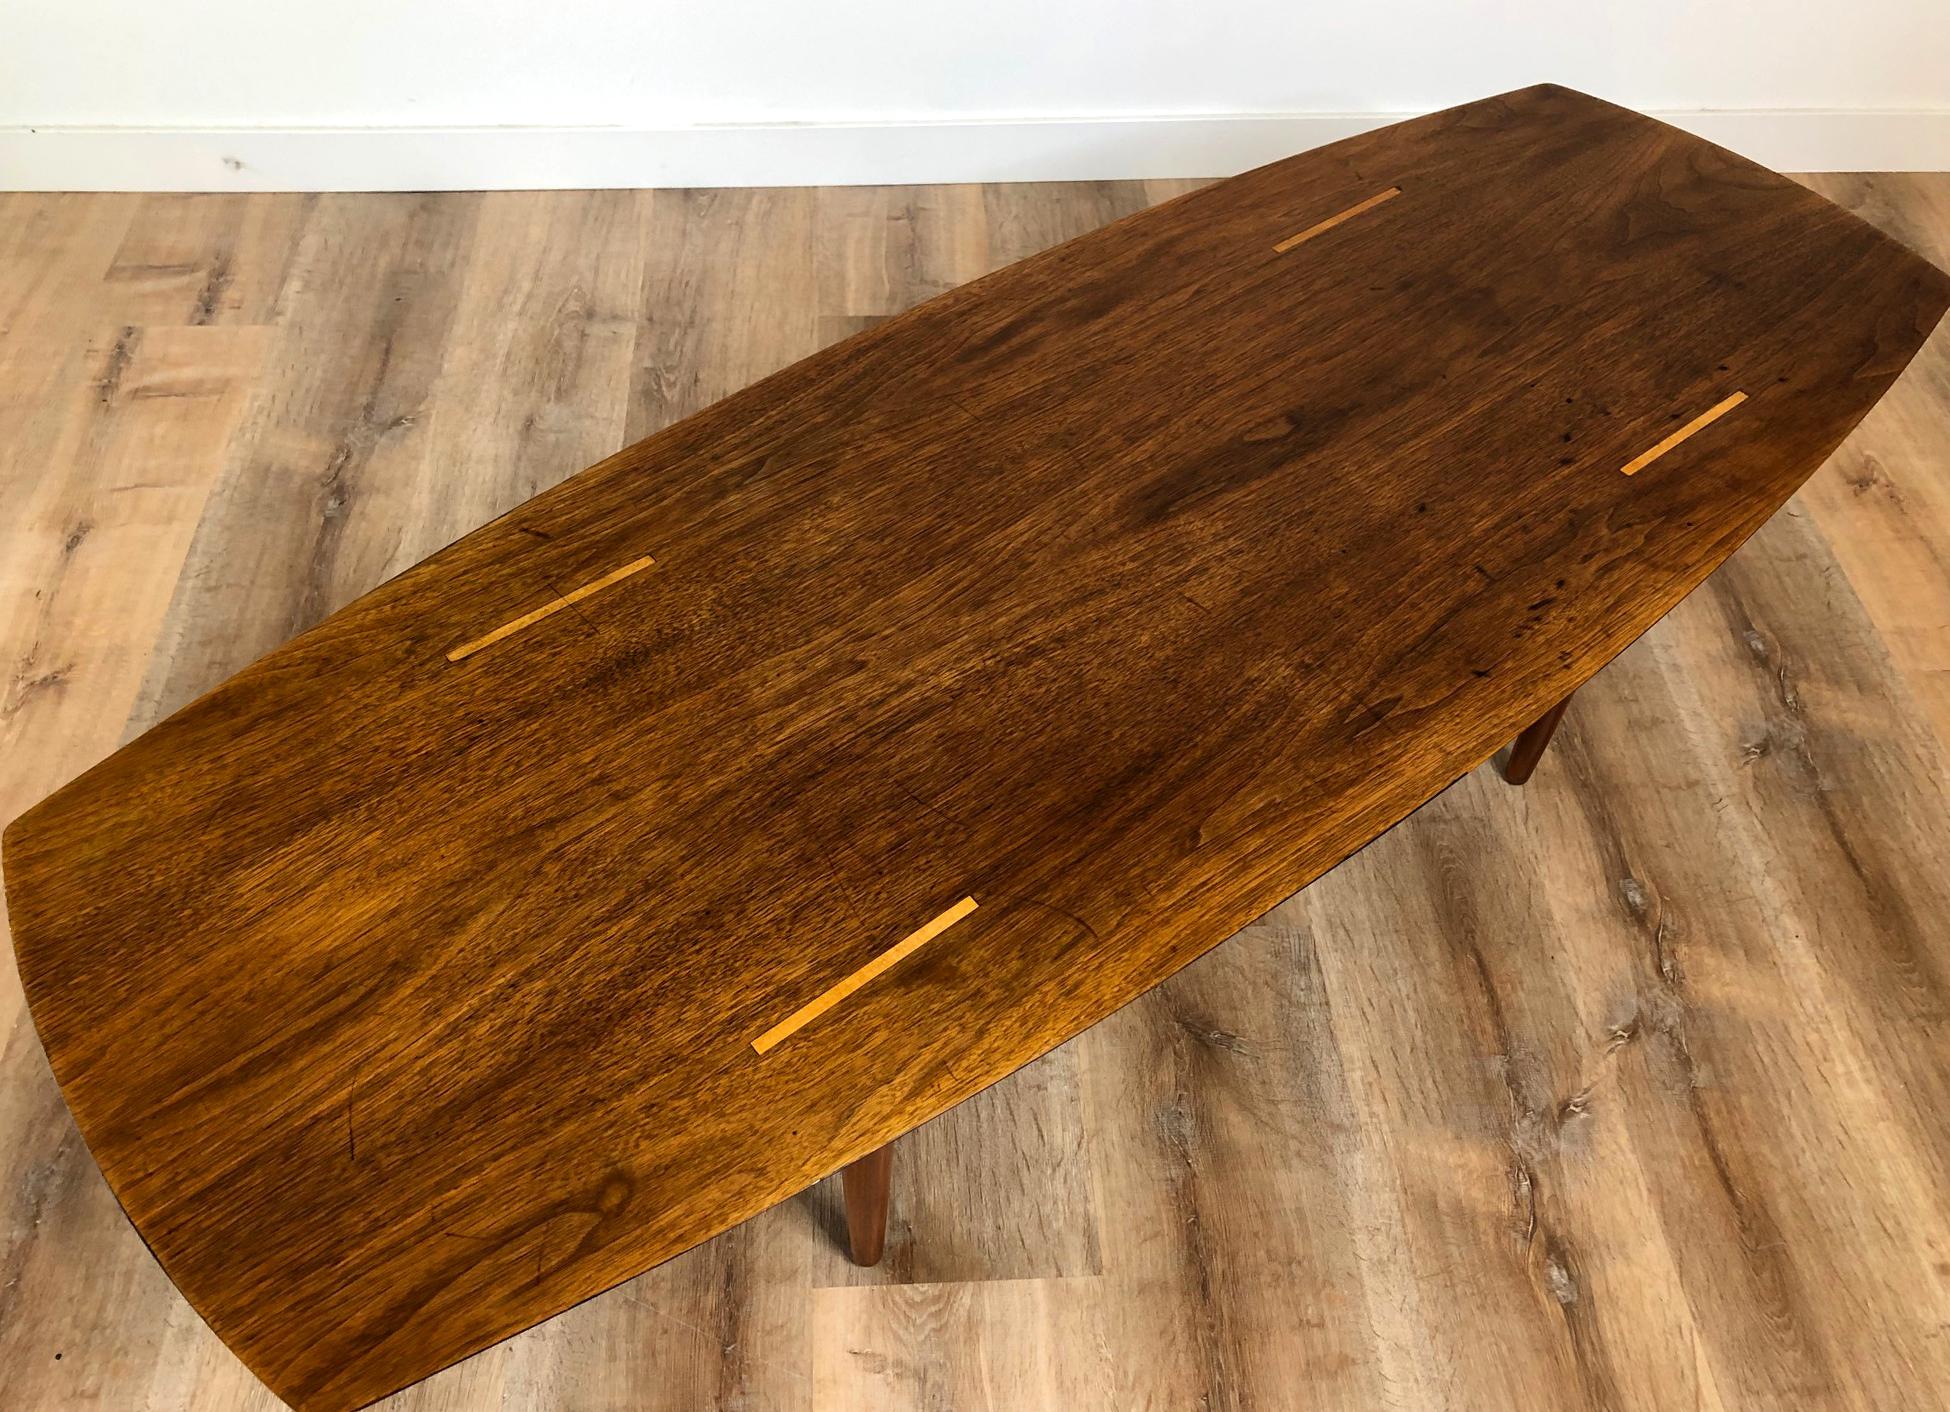 Top view of a vintage Mid-Century Modern surfboard coffee table designed by Abel Sorensen for Knoll. Find this at SPARKLEBARN in Seattle, WA next to the Nordic Museum in Ballard.